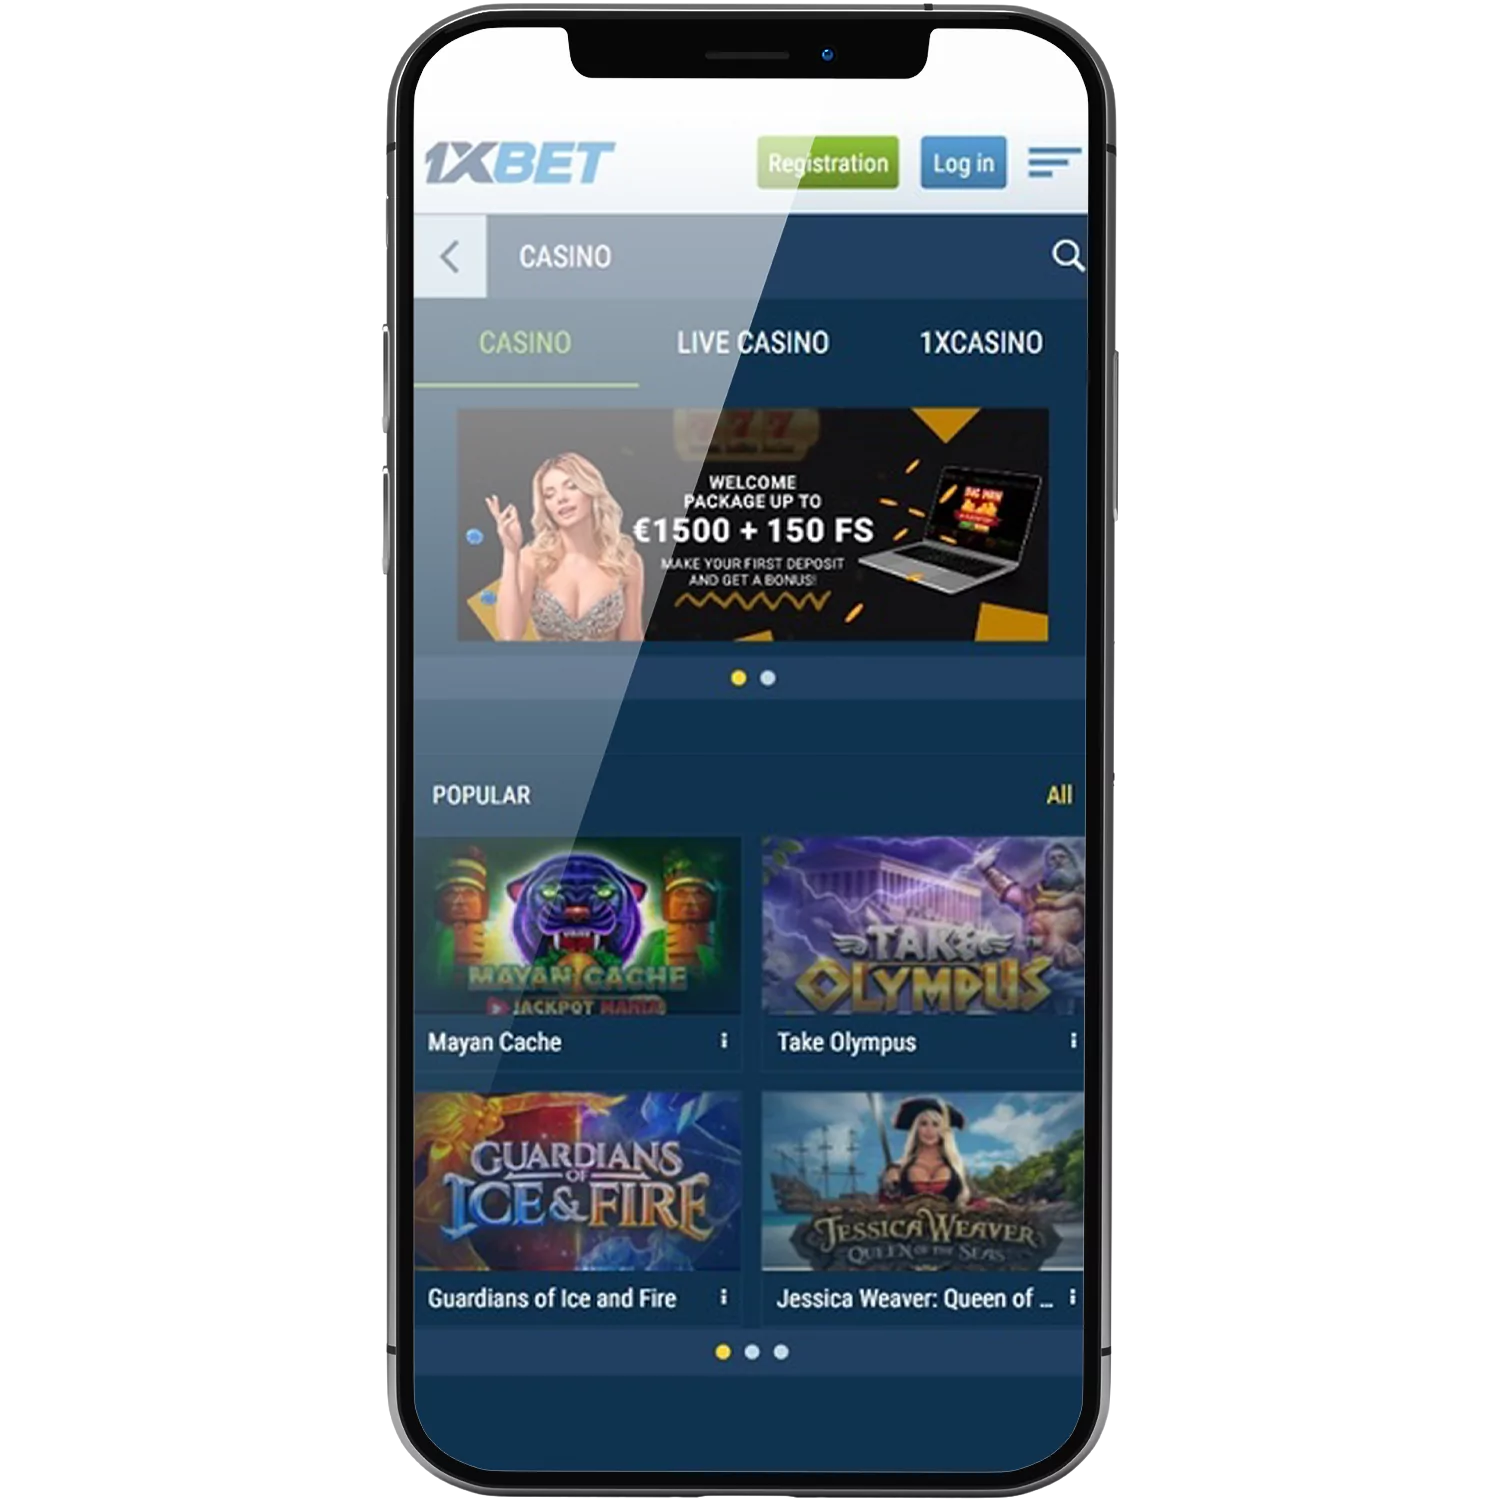 1xbet id login: An Incredibly Easy Method That Works For All